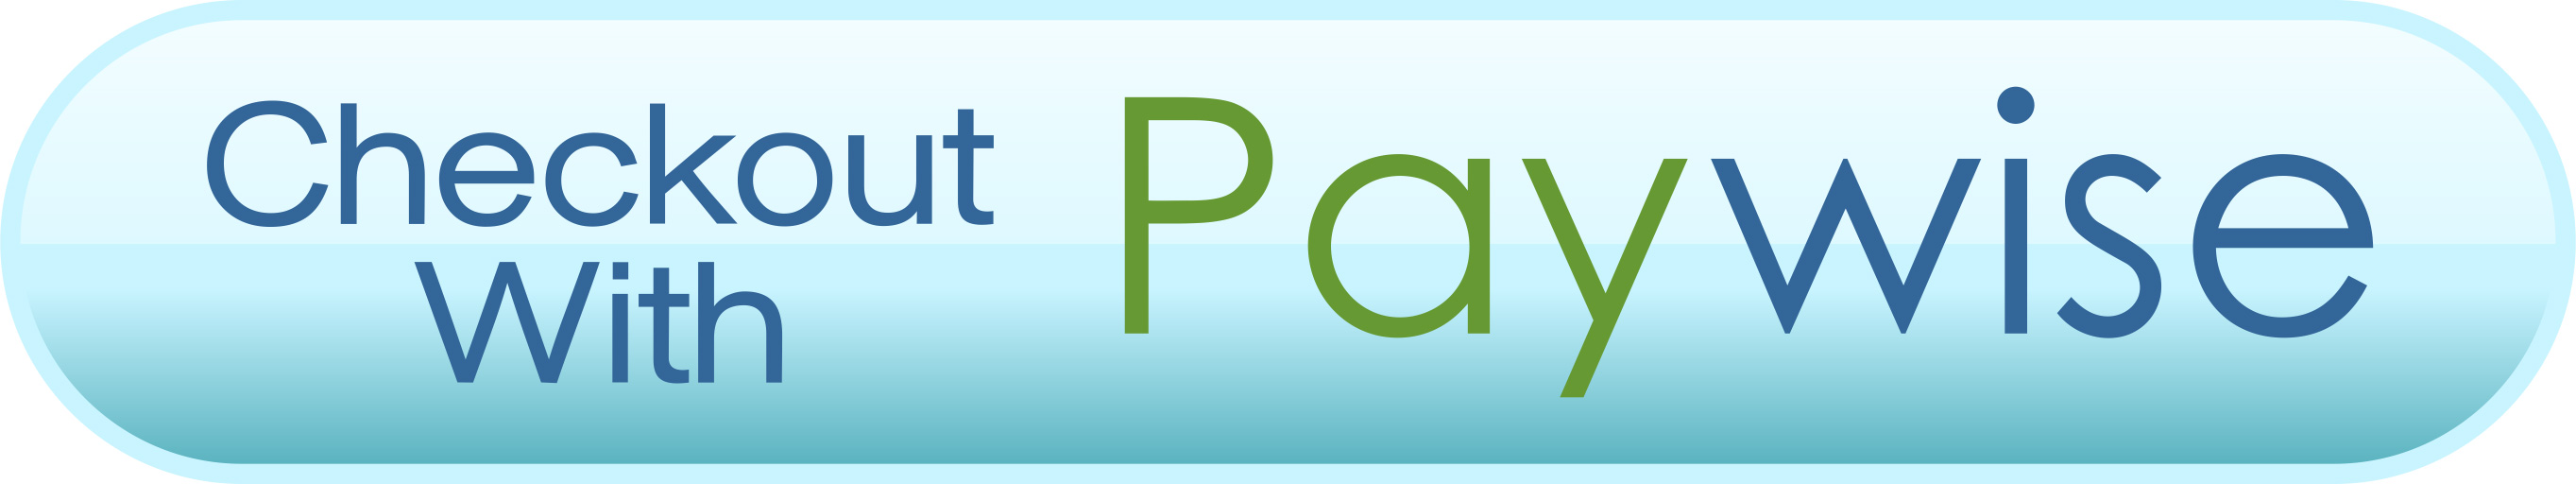 PAYWISE-checkout-512px